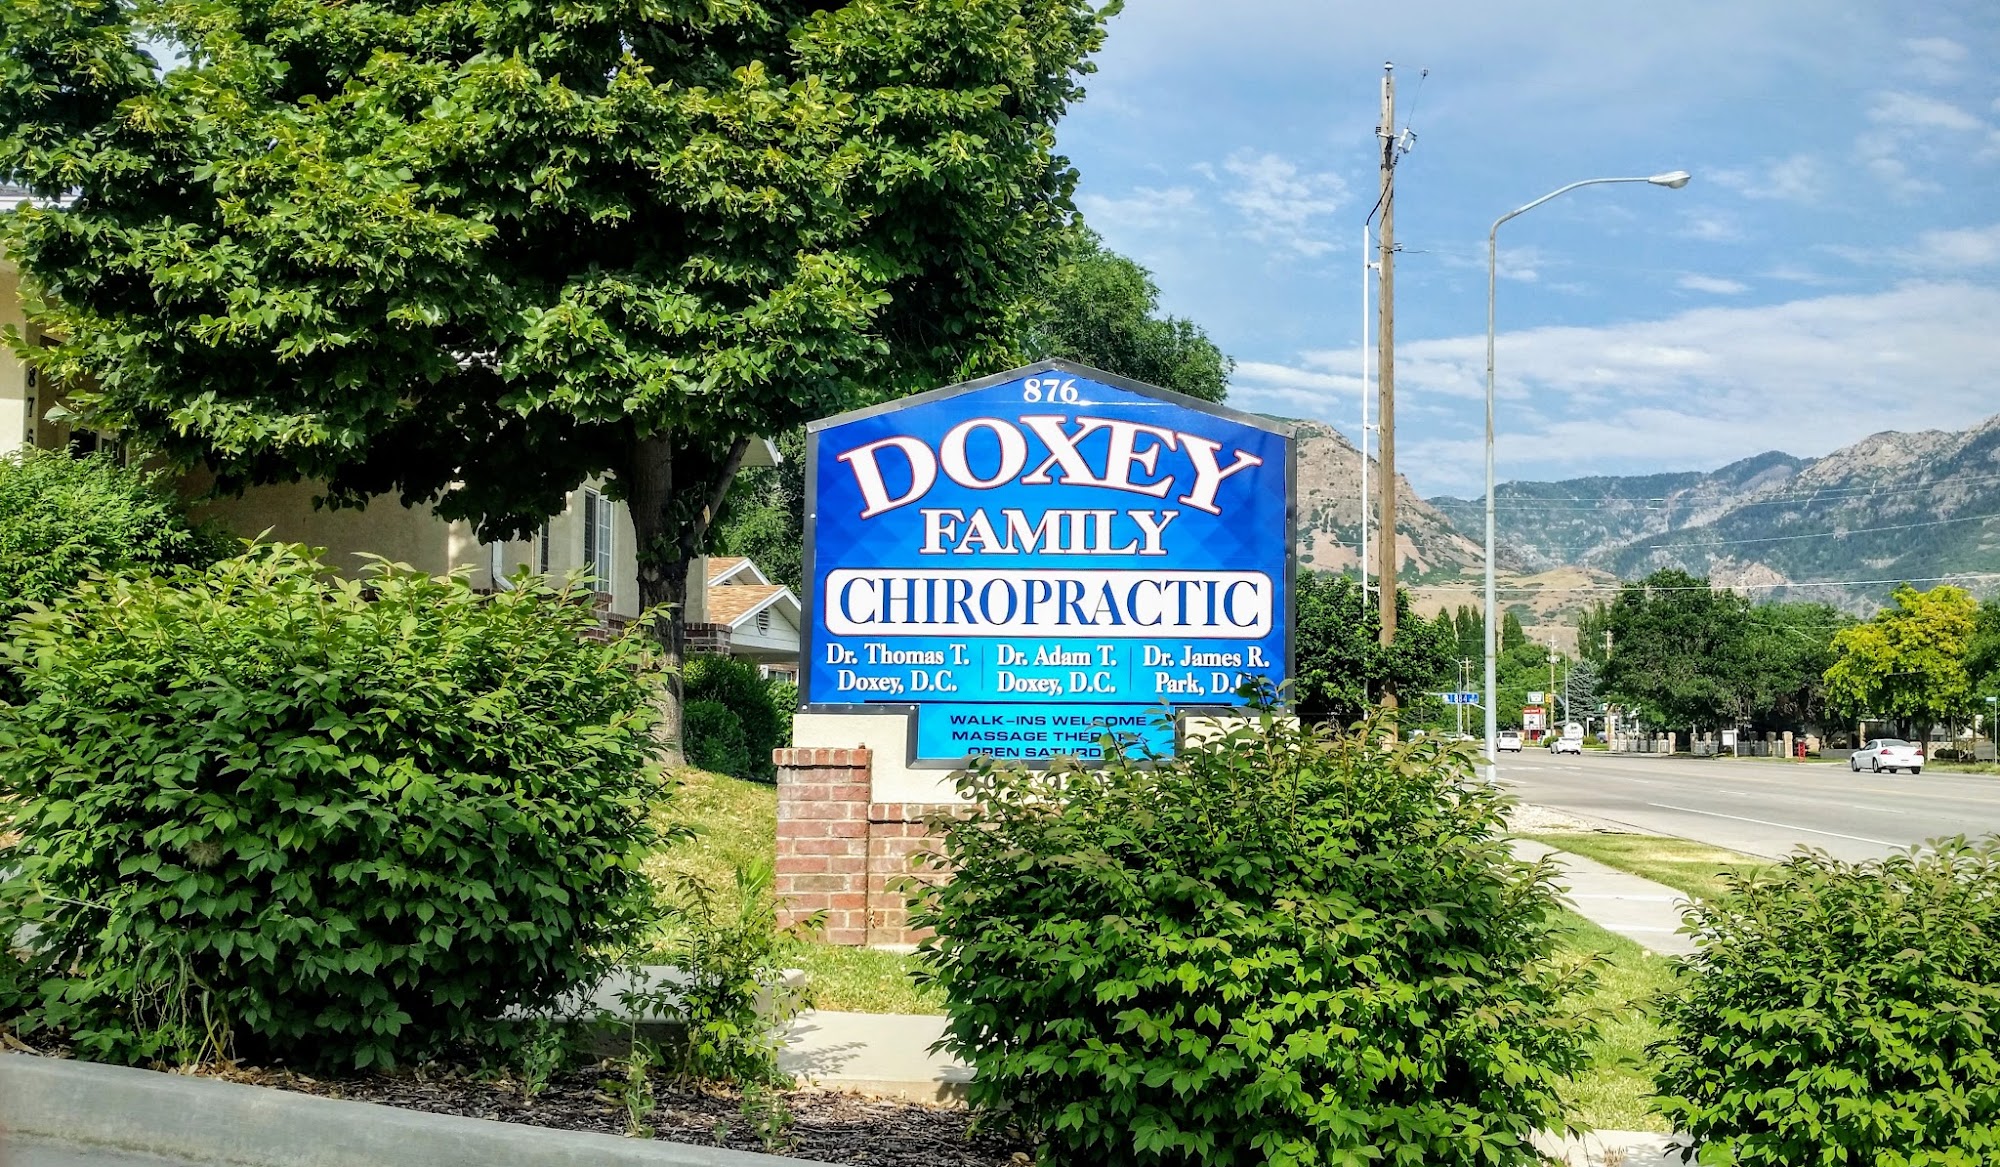 Doxey Family Chiropractic